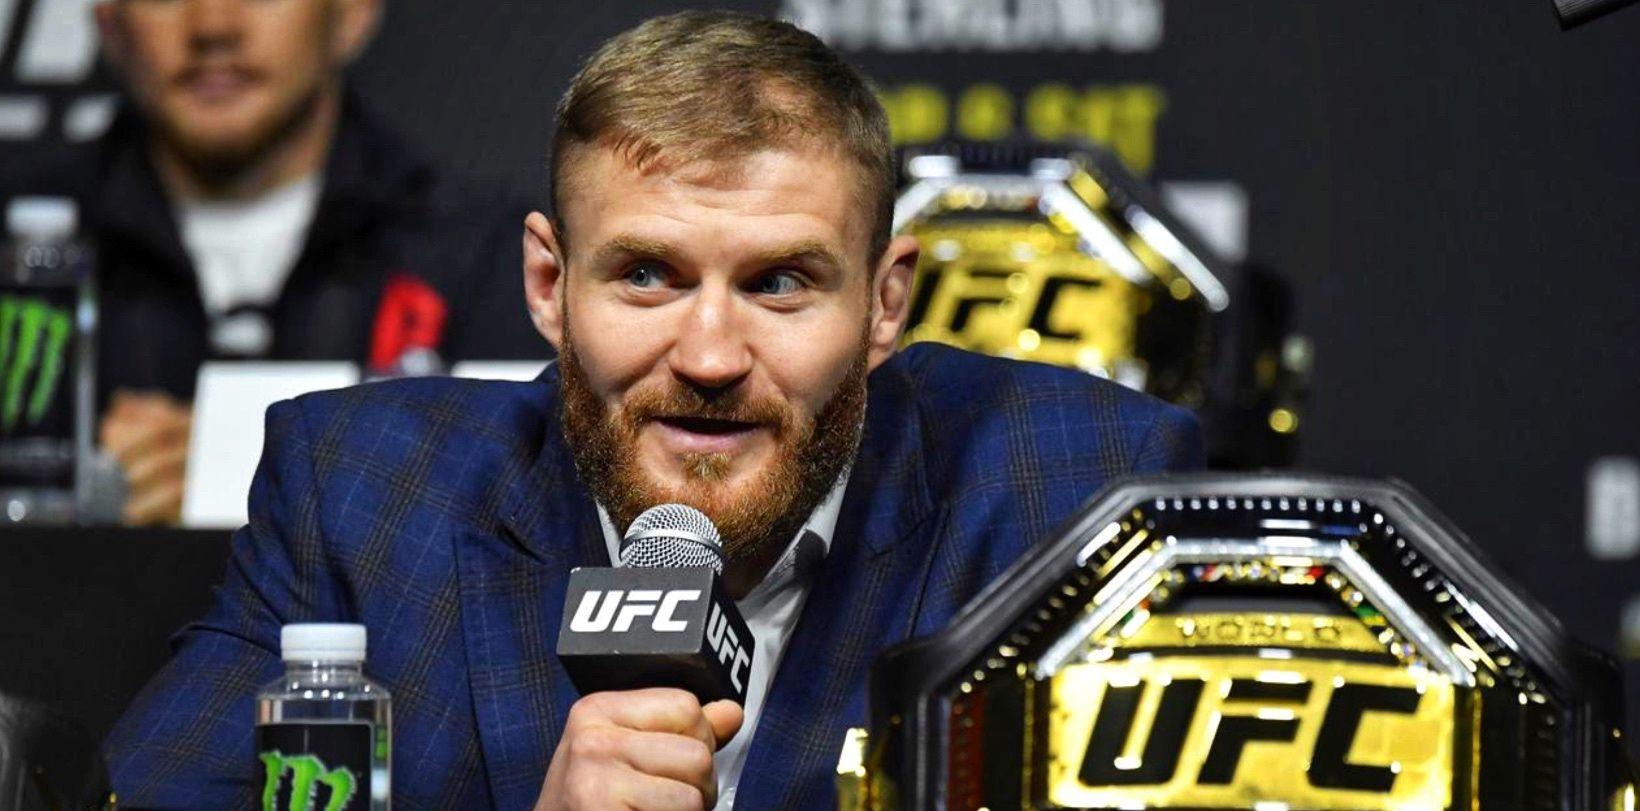 Jan Blachowicz ‘Had no idea’ He Was Fighting For A World Title Until After it Was Announced